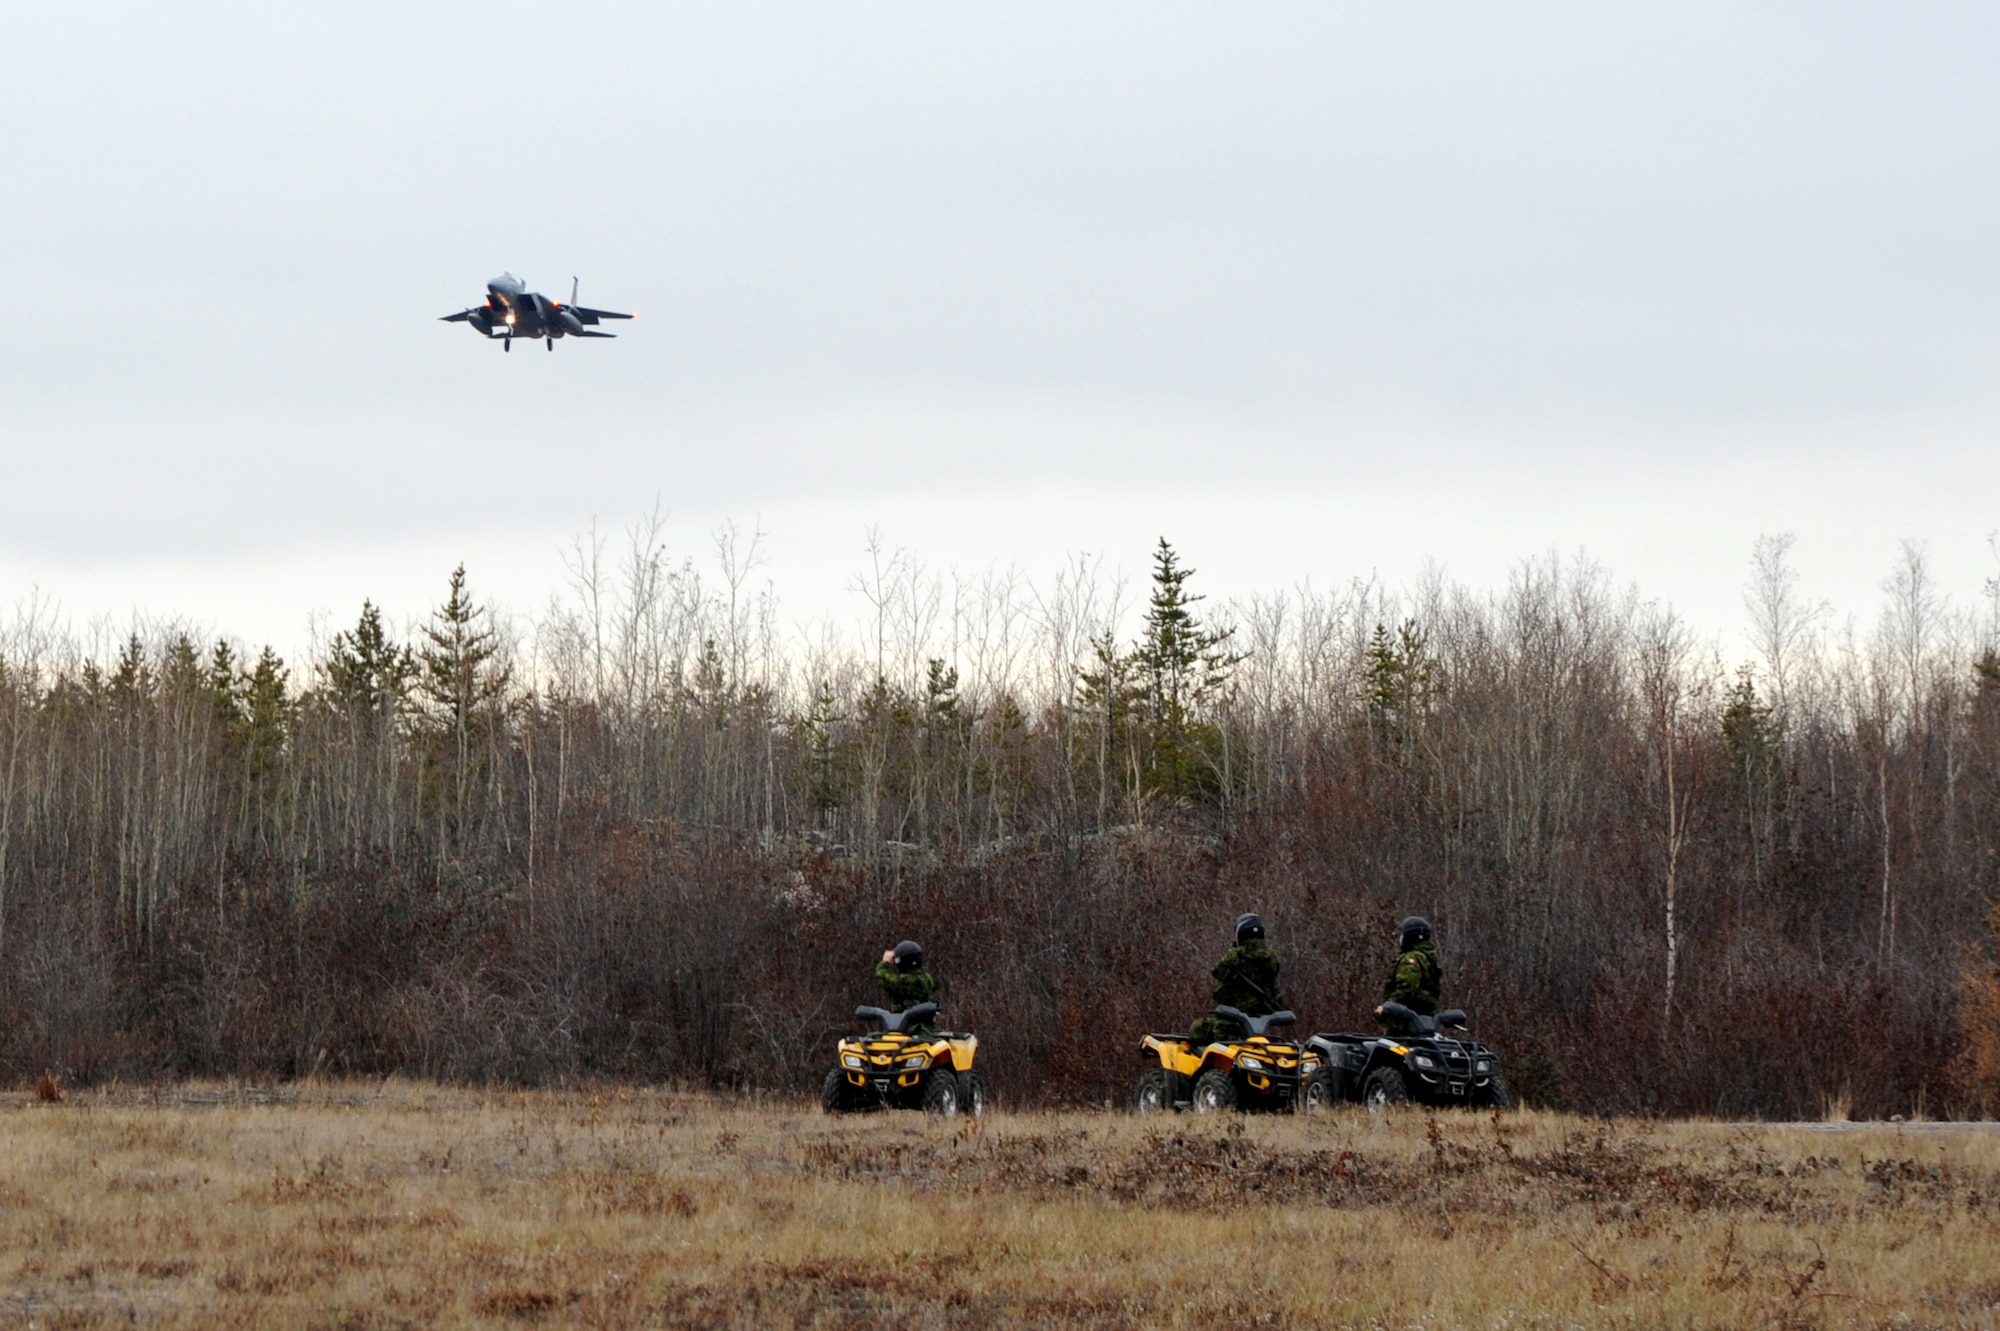 F-15 Eagles assigned to the 142nd Fighter Wing return from flight in support of Exercise Vigilant Shield 2017, Yellowknife, Northwest Territories, Oct. 20, 2016.  During this exercise, forces supporting North American Aerospace Defense Command (NORAD) will deploy and conduct air sovereignty operations in the far north and the high Arctic demonstrating the ability to detect, identify and meet possible threats in some of the most remote regions in the world.  (U.S. Air National Guard photo by Senior Master Sgt. Shelly Davison, 142nd Fighter Wing Public Affairs). 